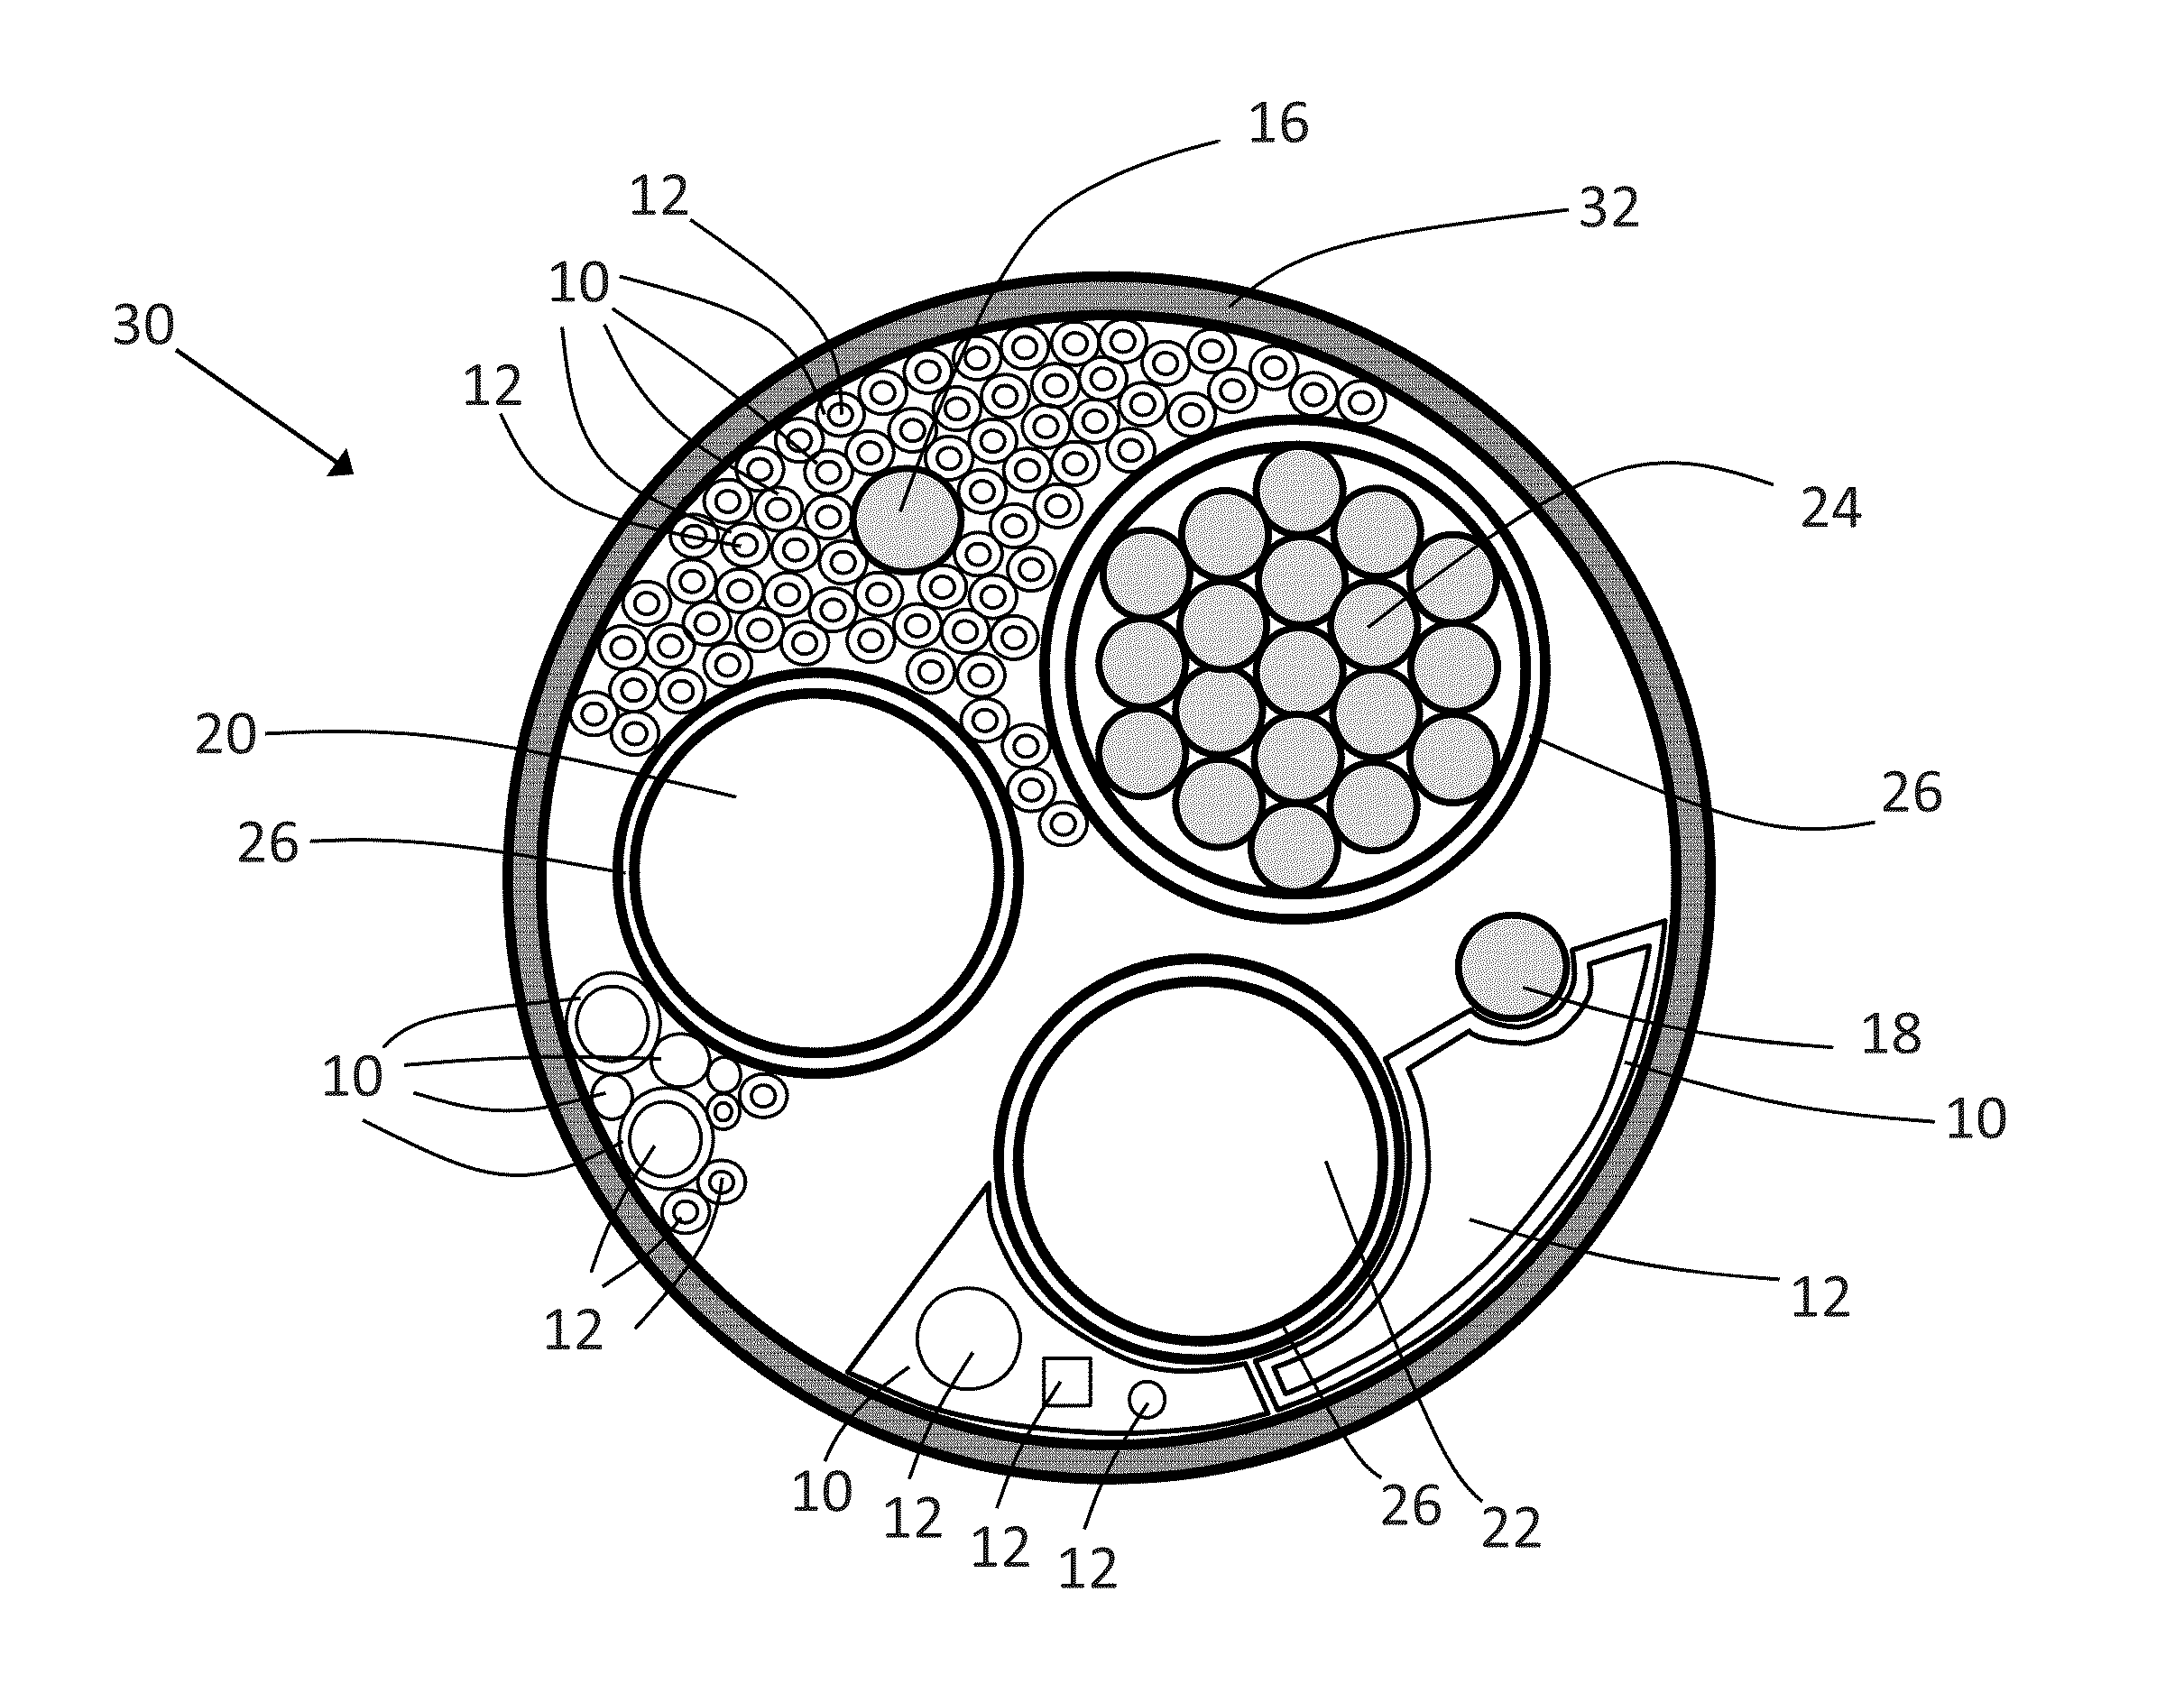 Internal cooling of power cables and power umbilicals